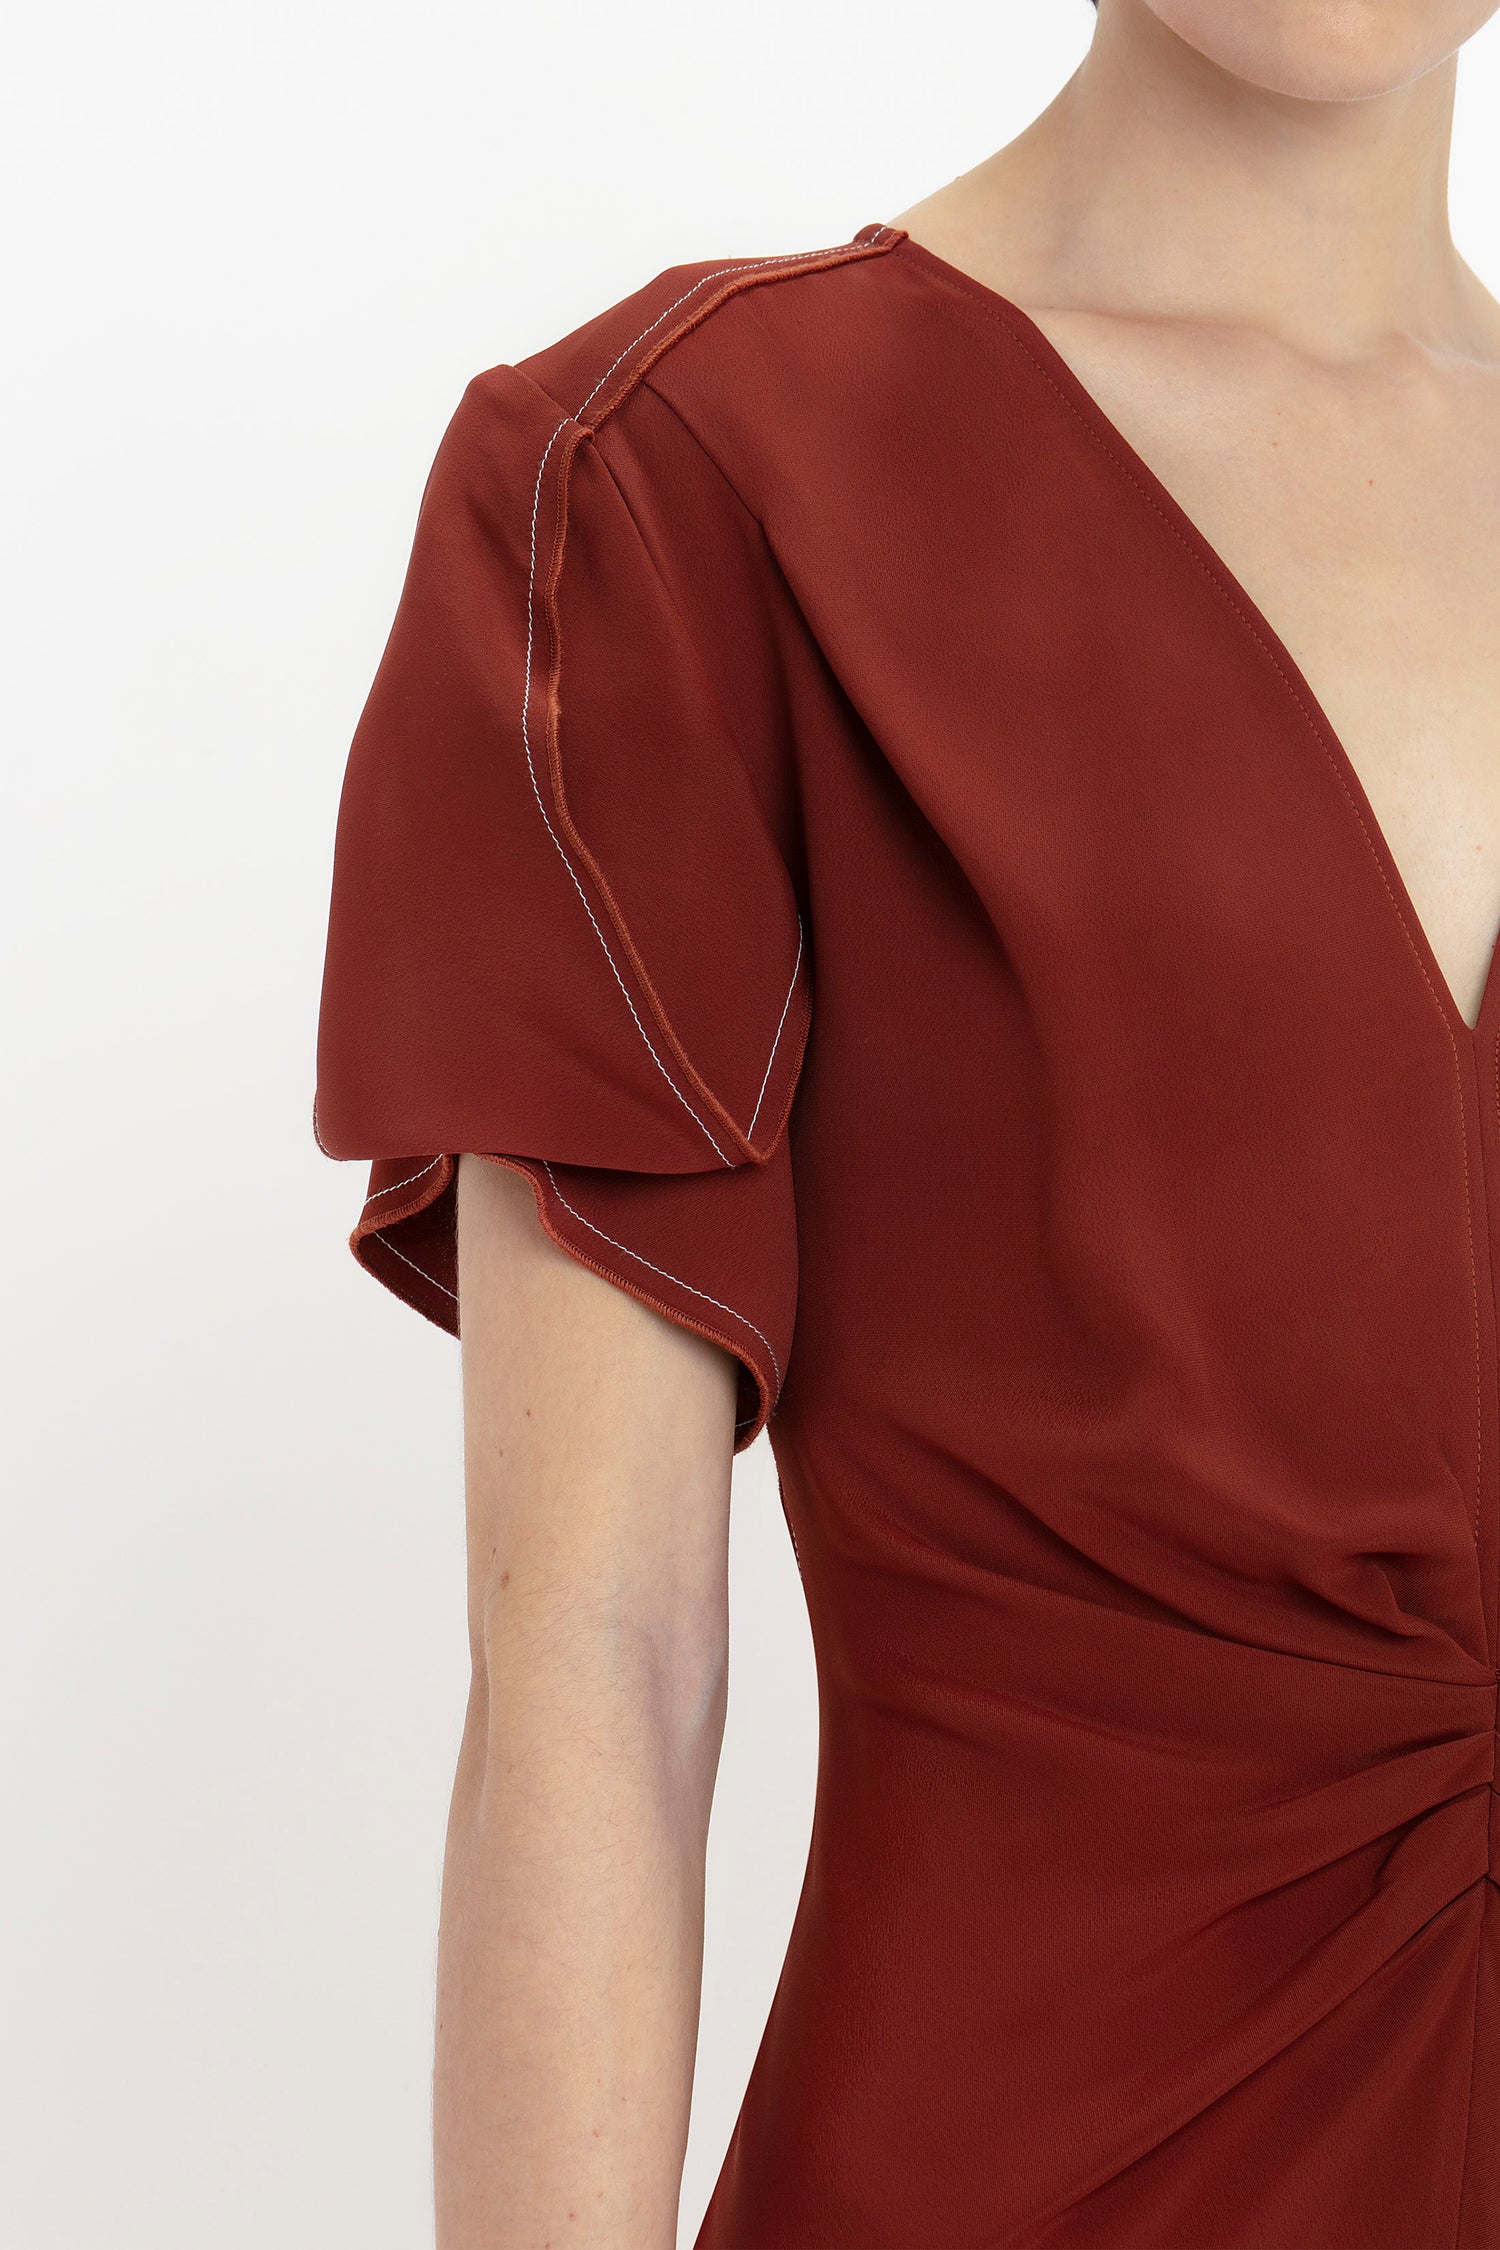 Close-up of a person wearing the Gathered V-Neck Midi Dress In Russet by Victoria Beckham, a waist-defining pleat detail dress with a deep V-neckline and short puff sleeves, featuring white stitching details.